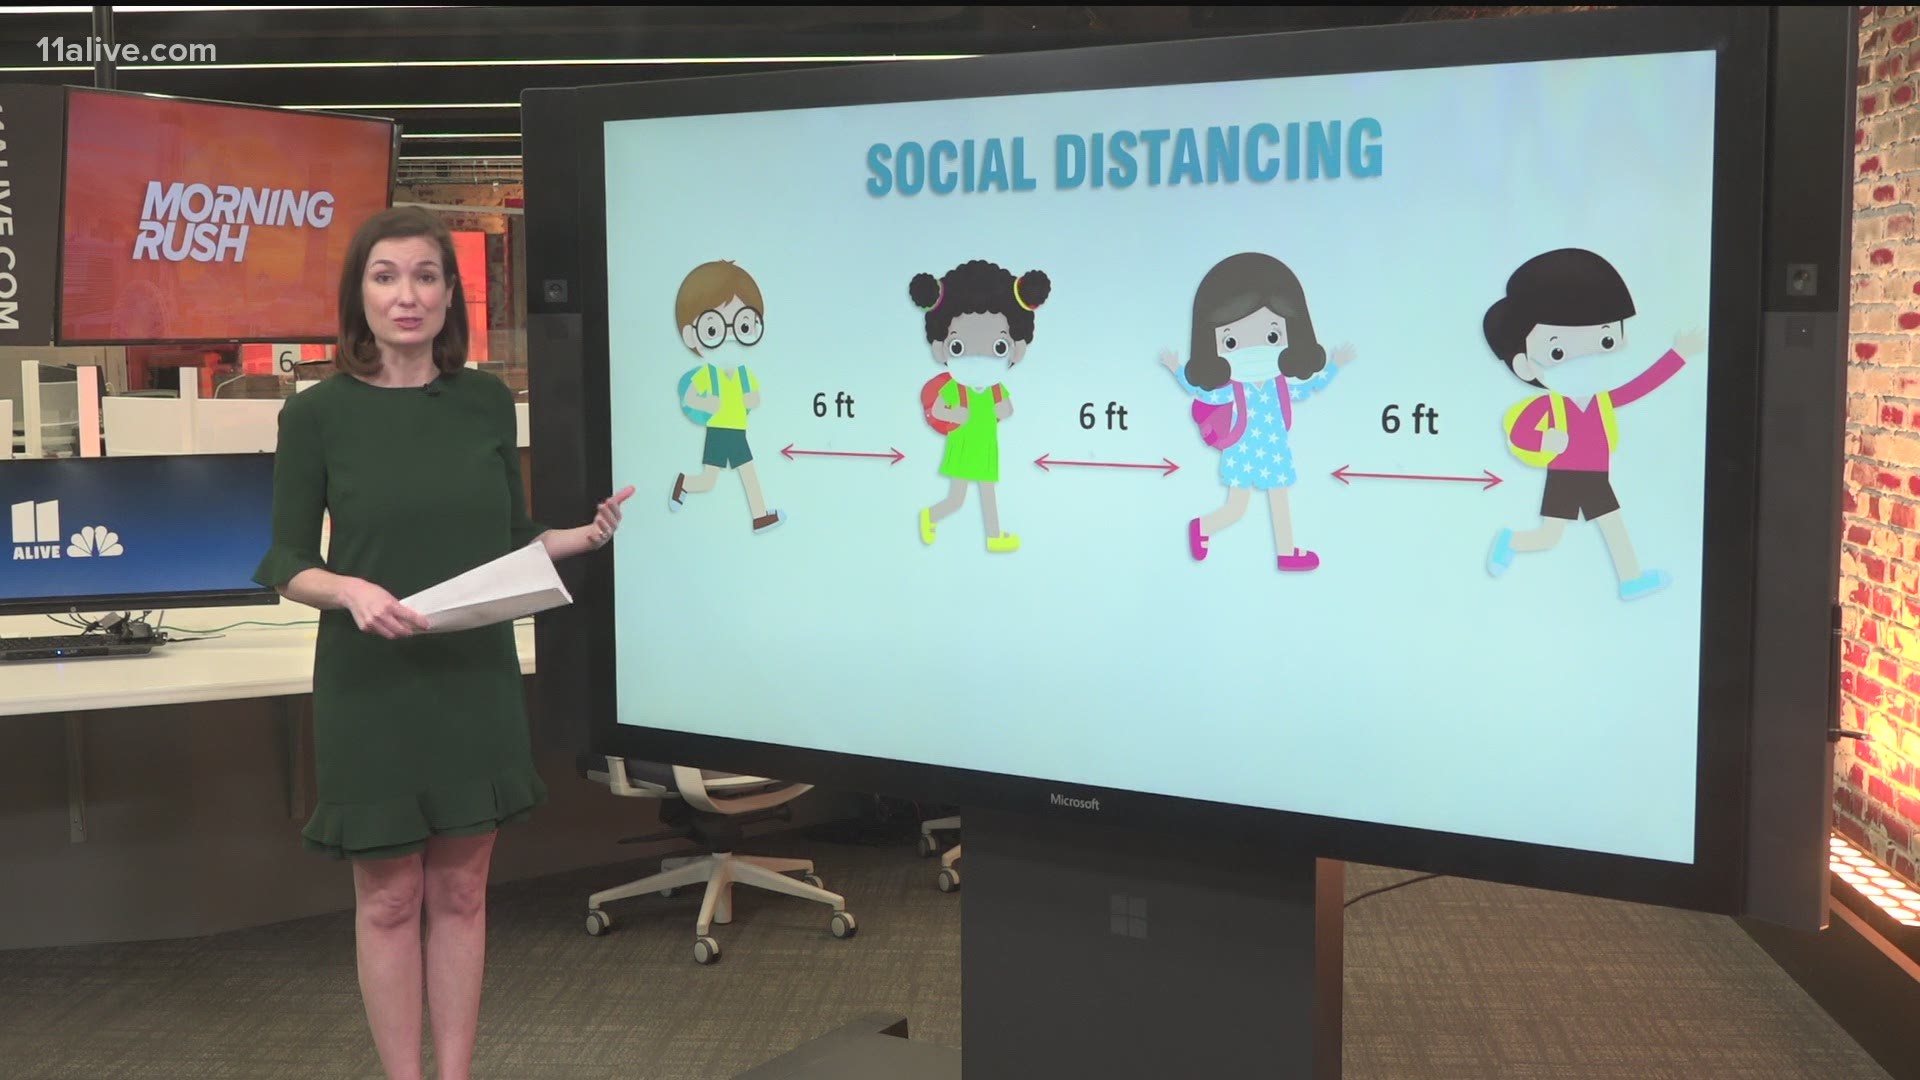 The CDC could modify the social distancing recommended distance from 6ft to 3ft.